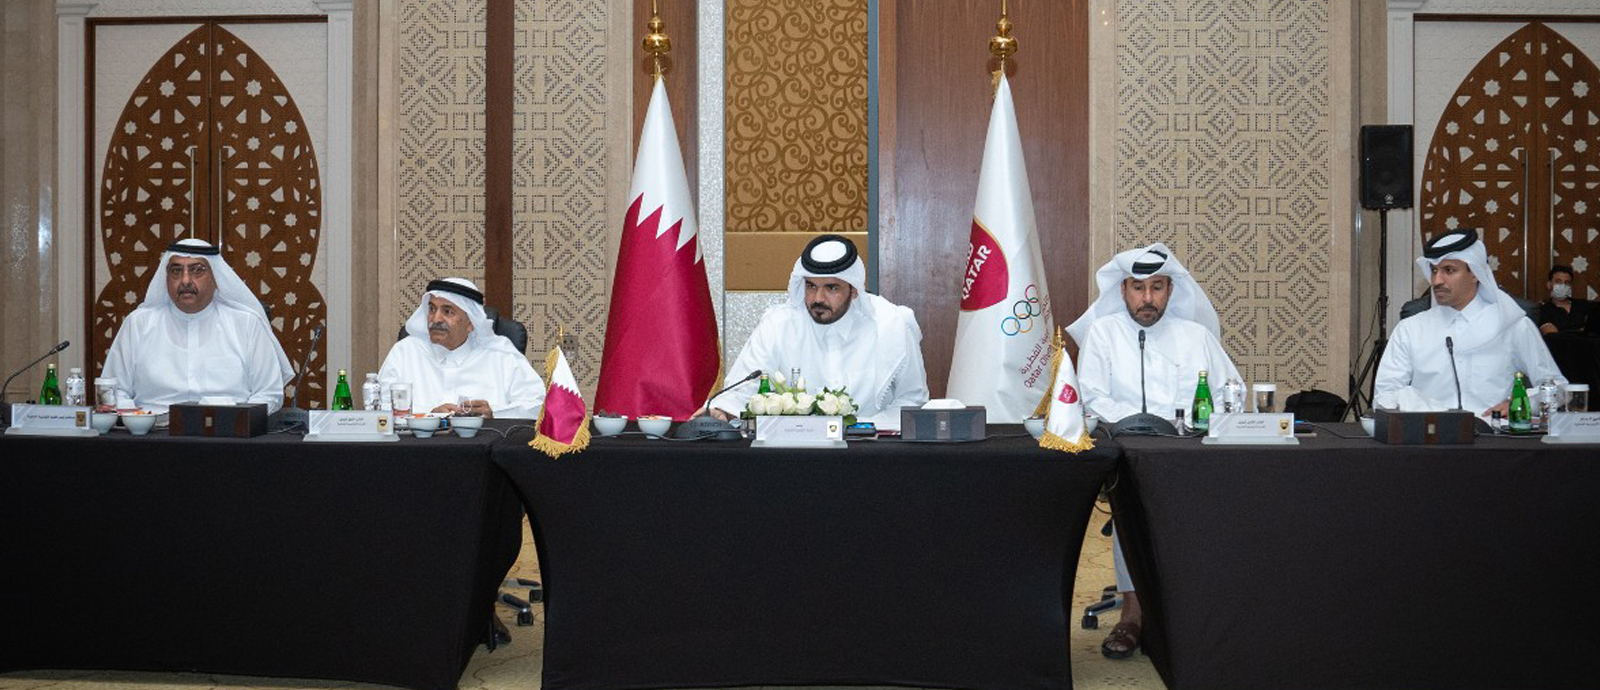 Sheikh Joaan bin Hamad re-elected as the QOC President